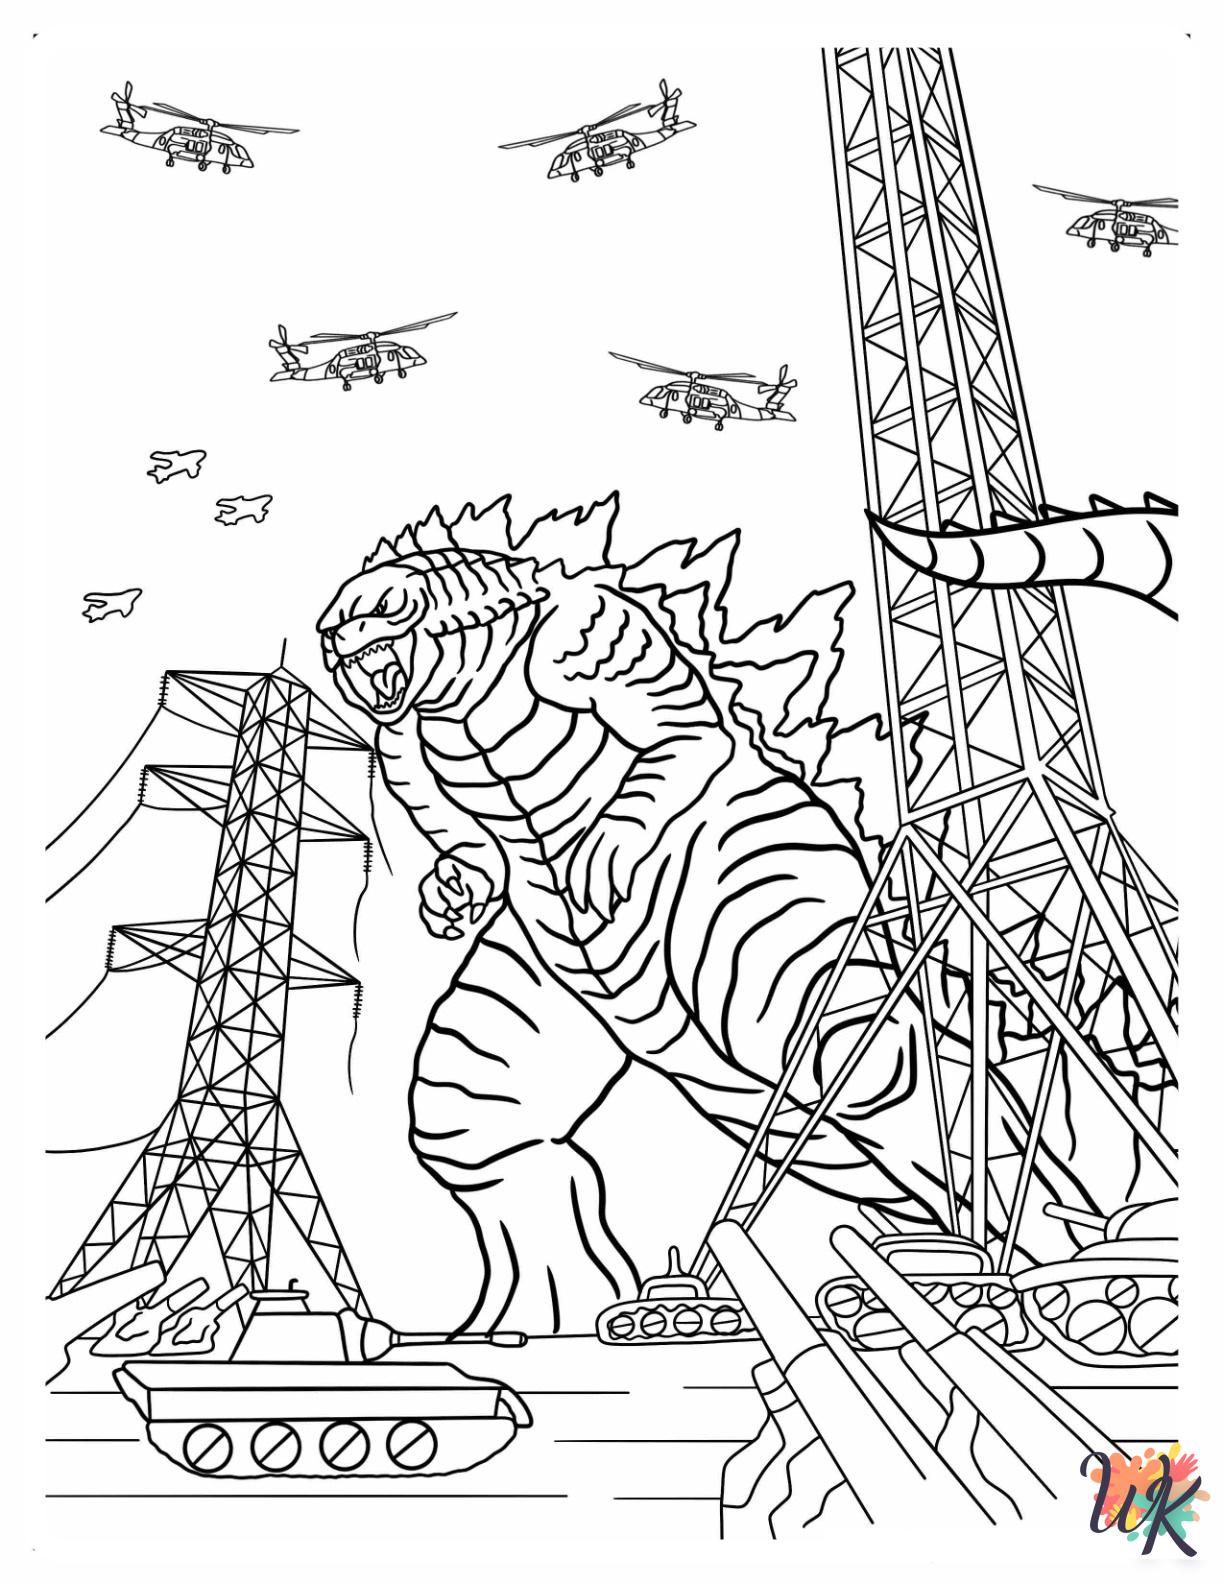 Godzilla themed coloring pages